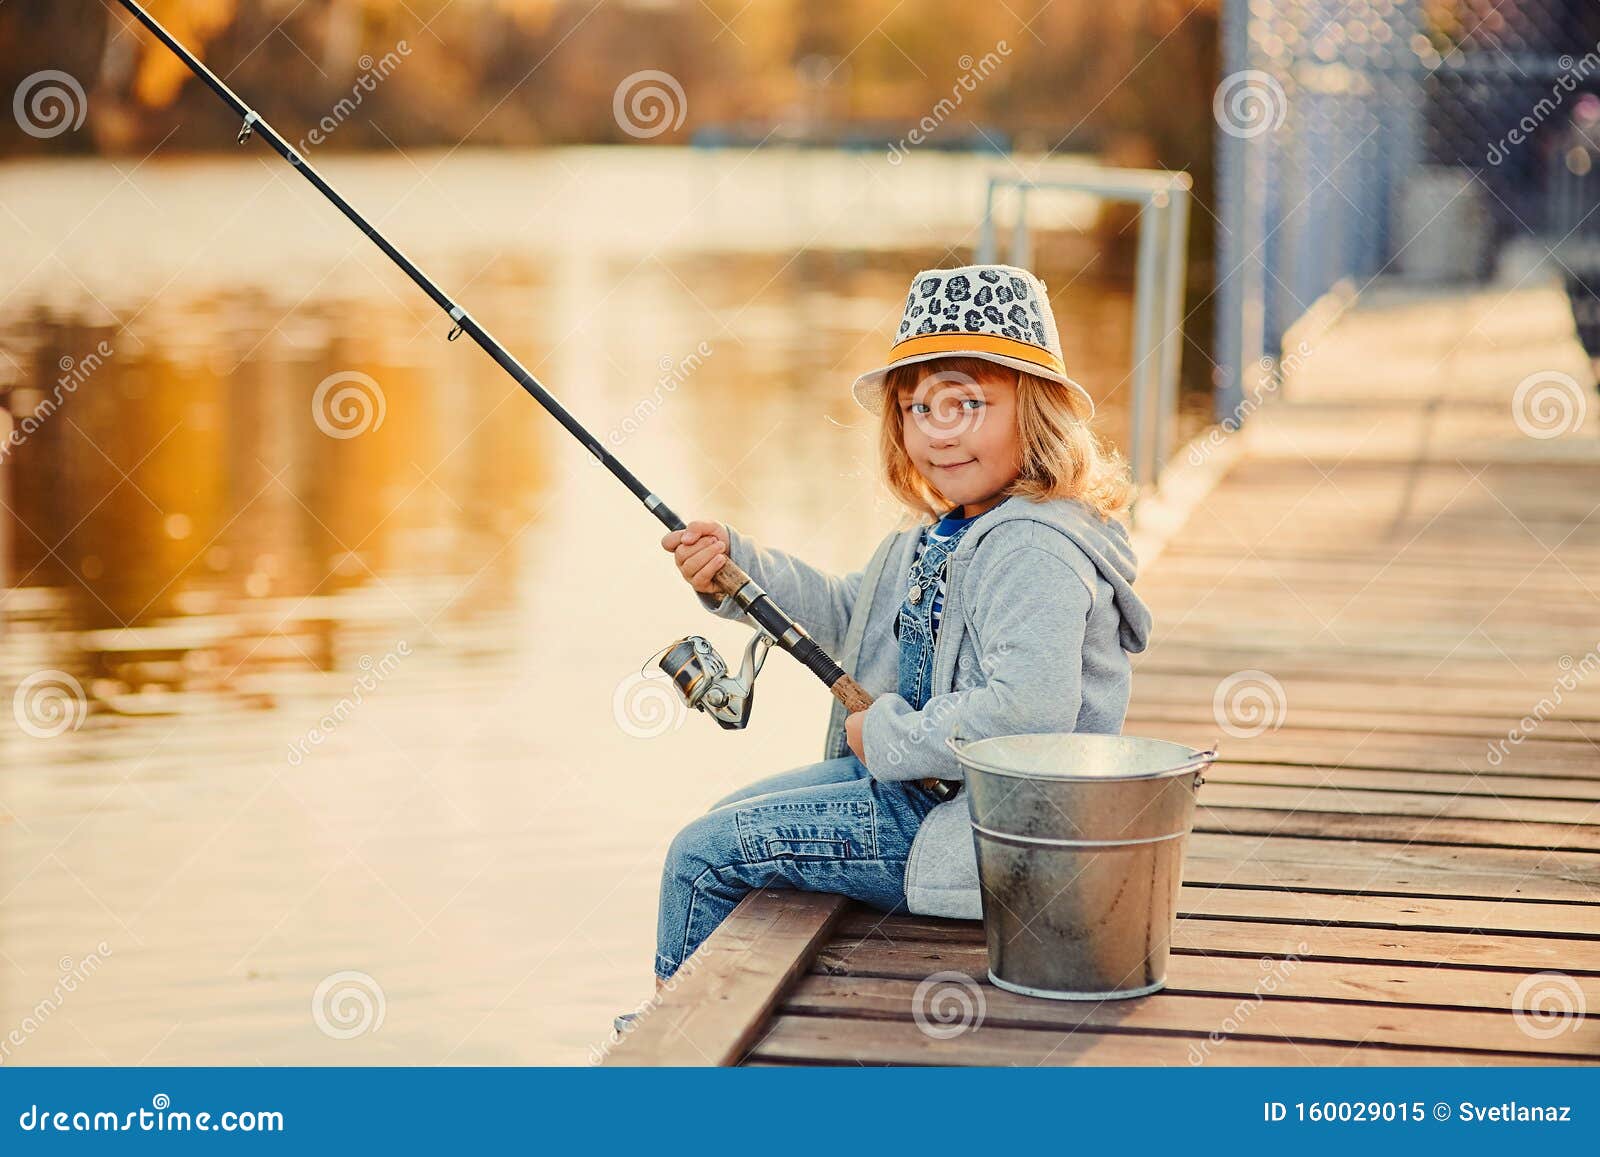 A Little Girl Fishing with a Fishing Rod from a Pontoon or Pier on